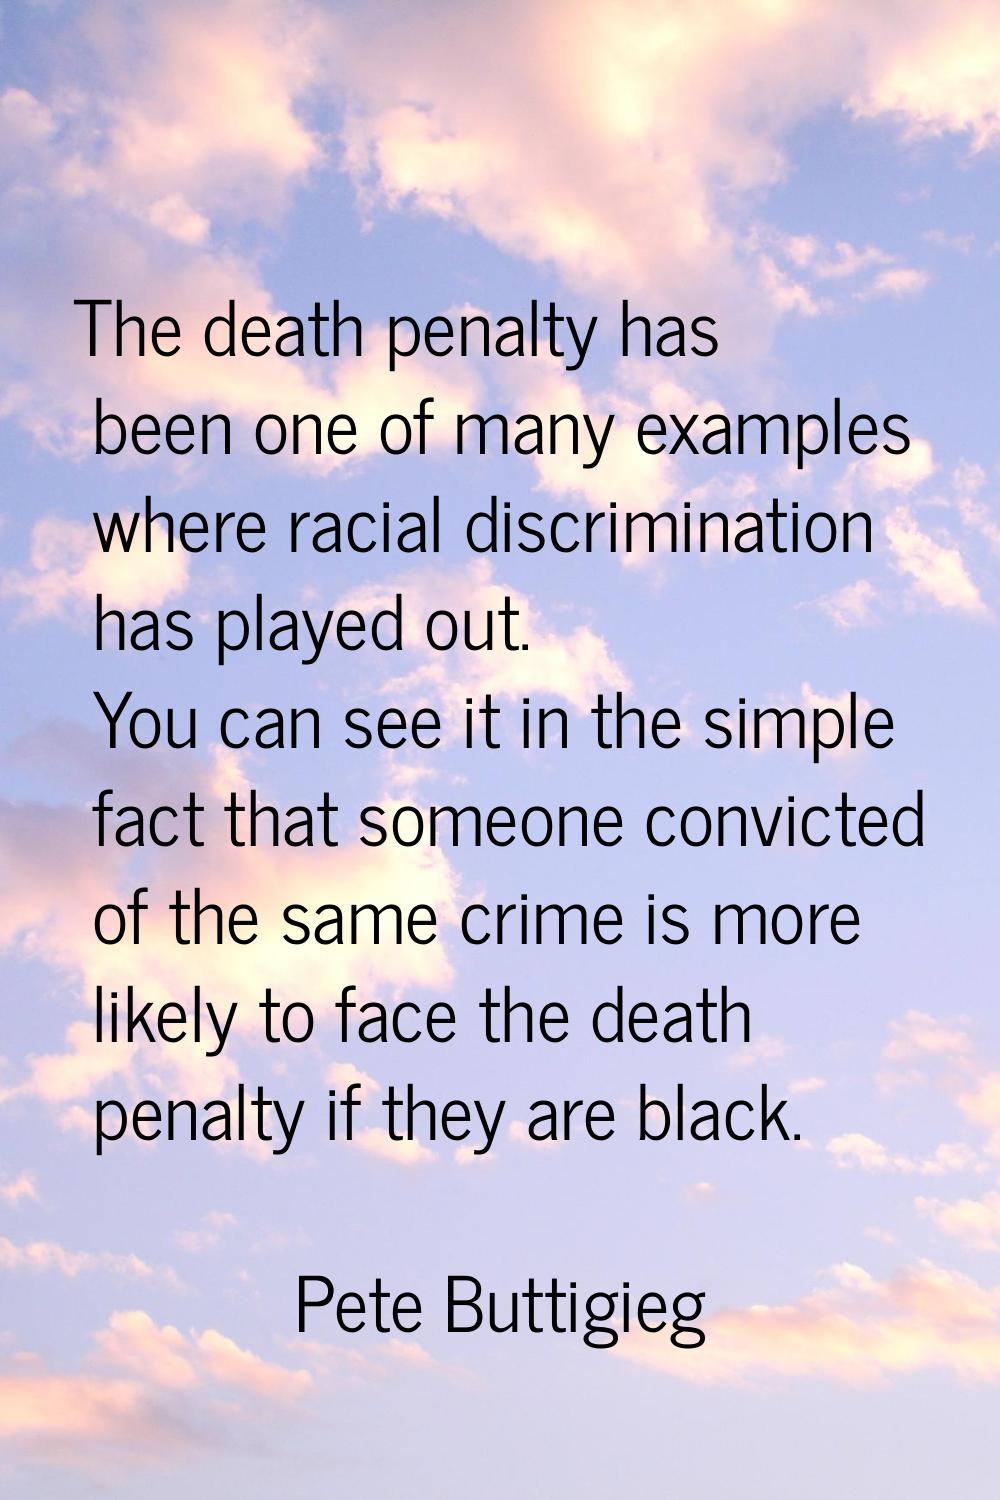 The death penalty has been one of many examples where racial discrimination has played out. You can